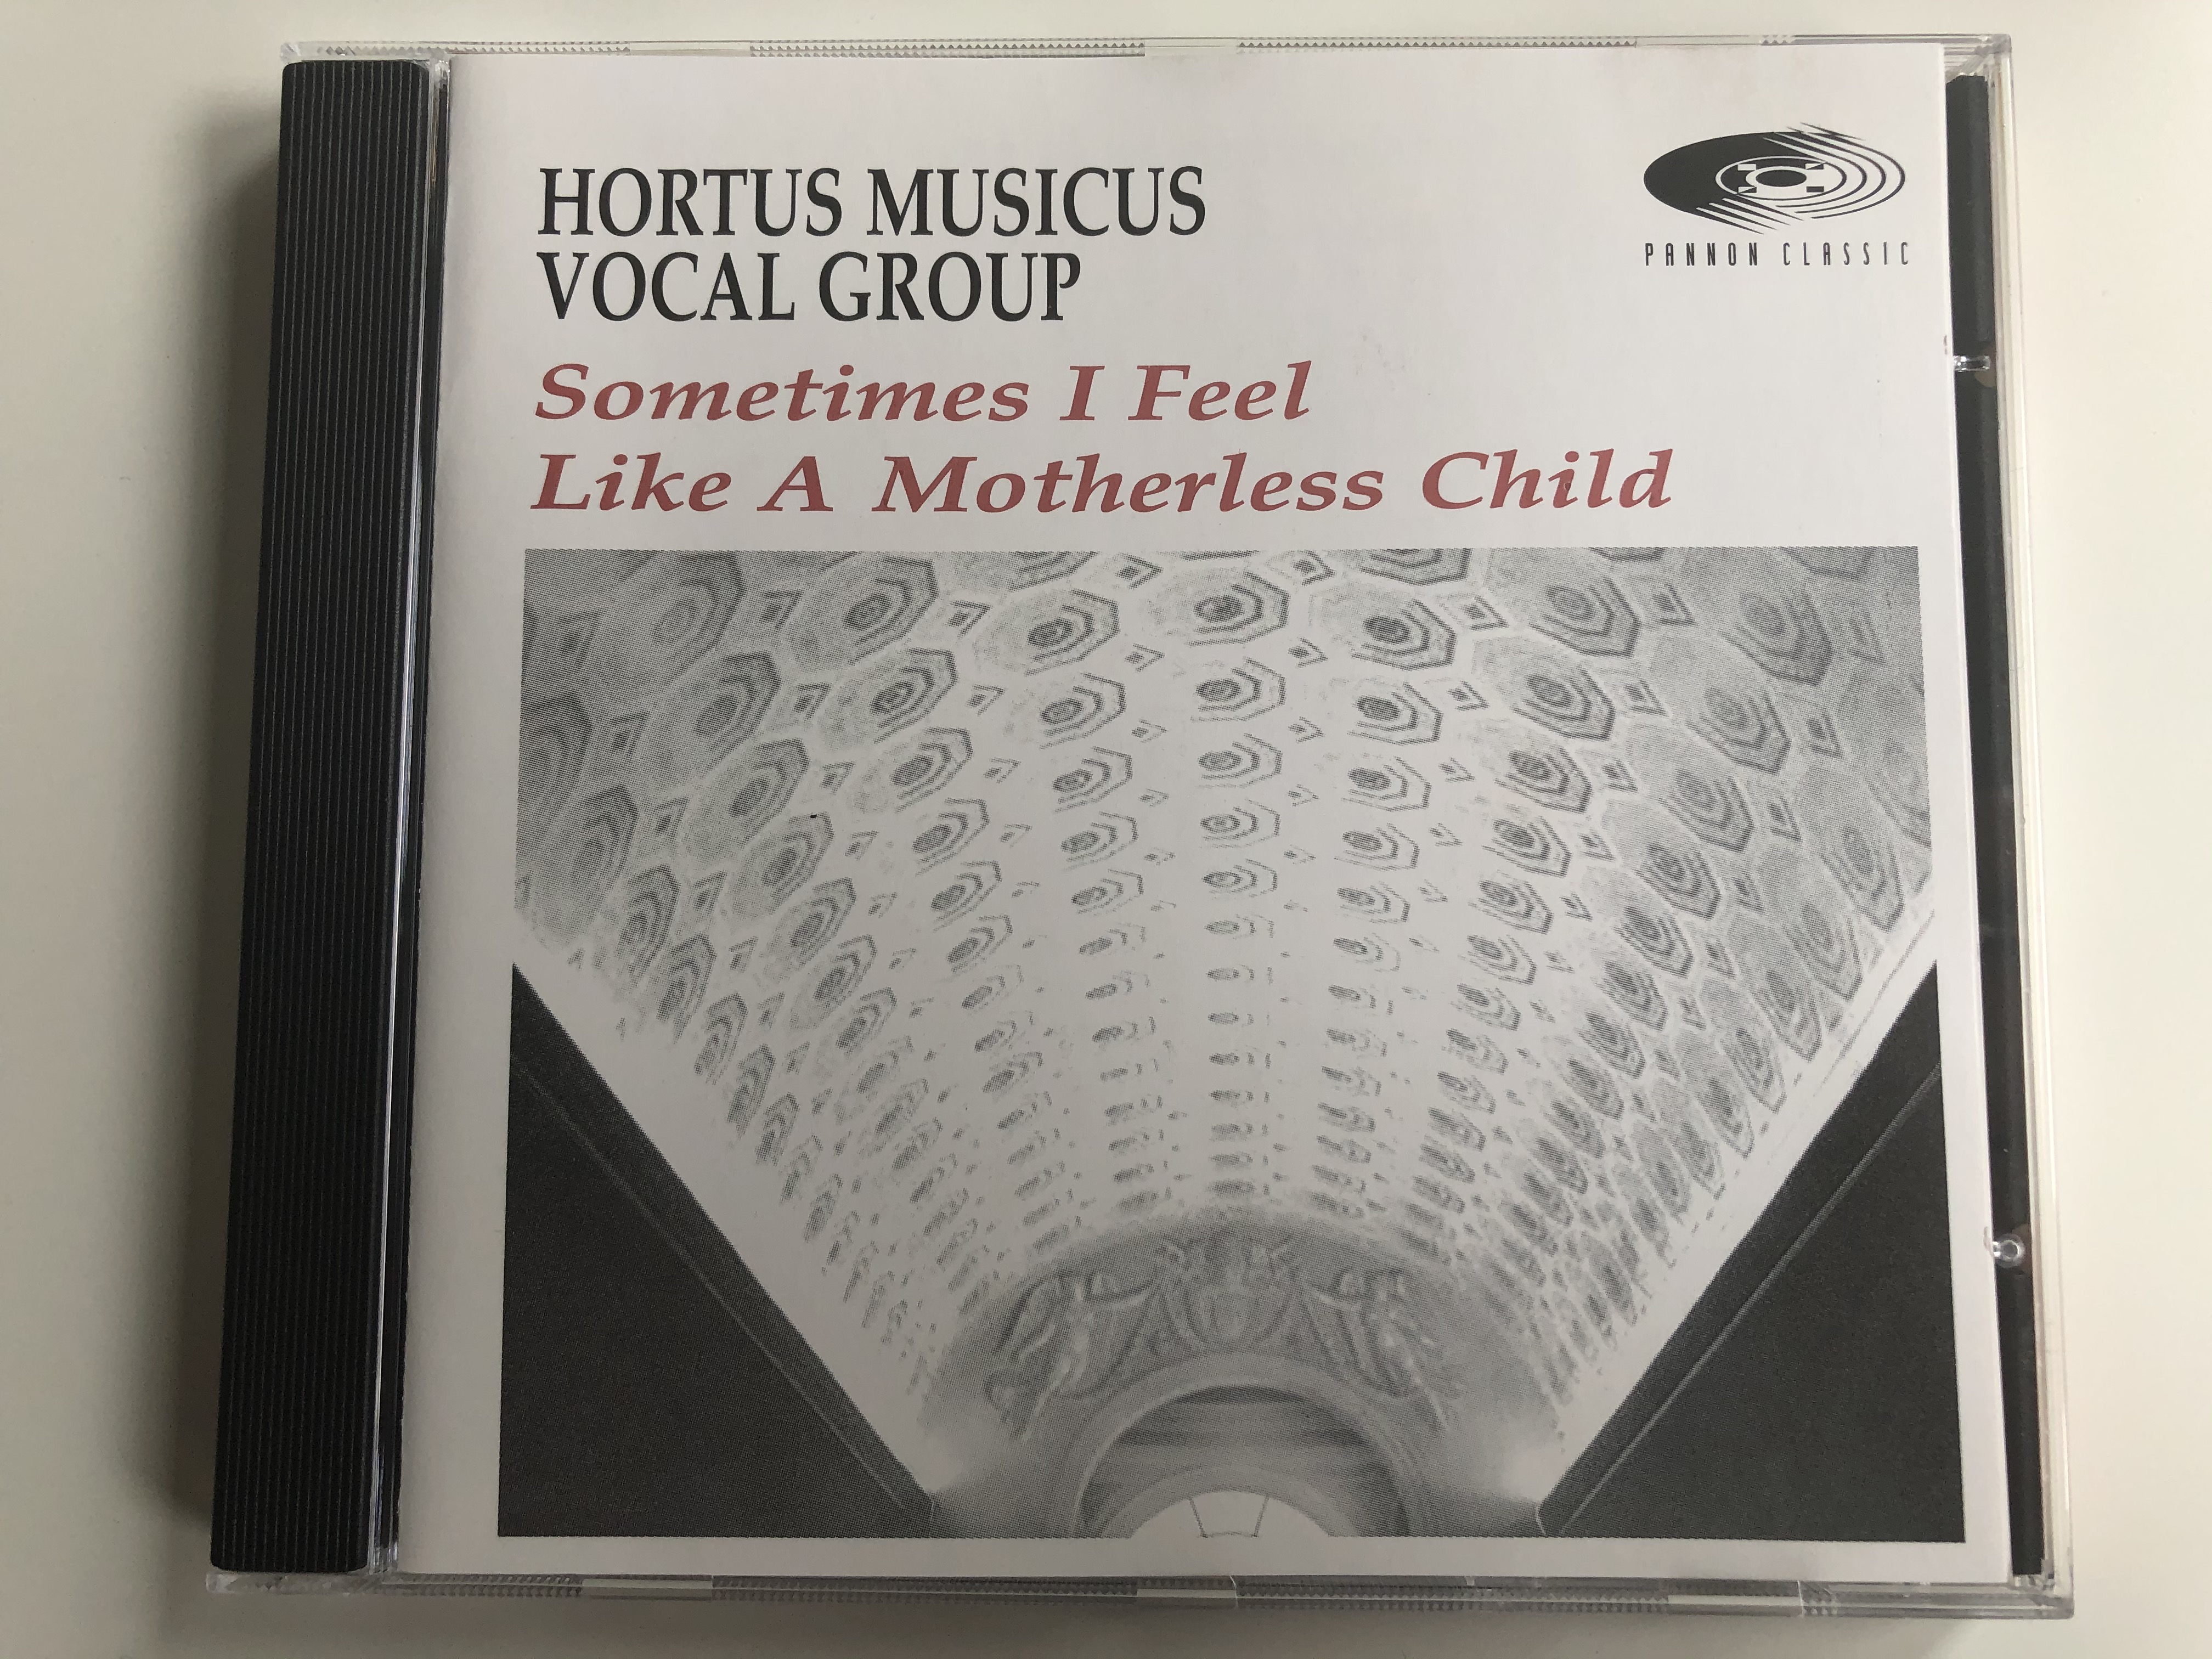 hortus-musicus-vocal-group-sometimes-i-feel-like-a-motherless-child-pannon-classic-audio-cd-1997-pcl-8011-1-.jpg